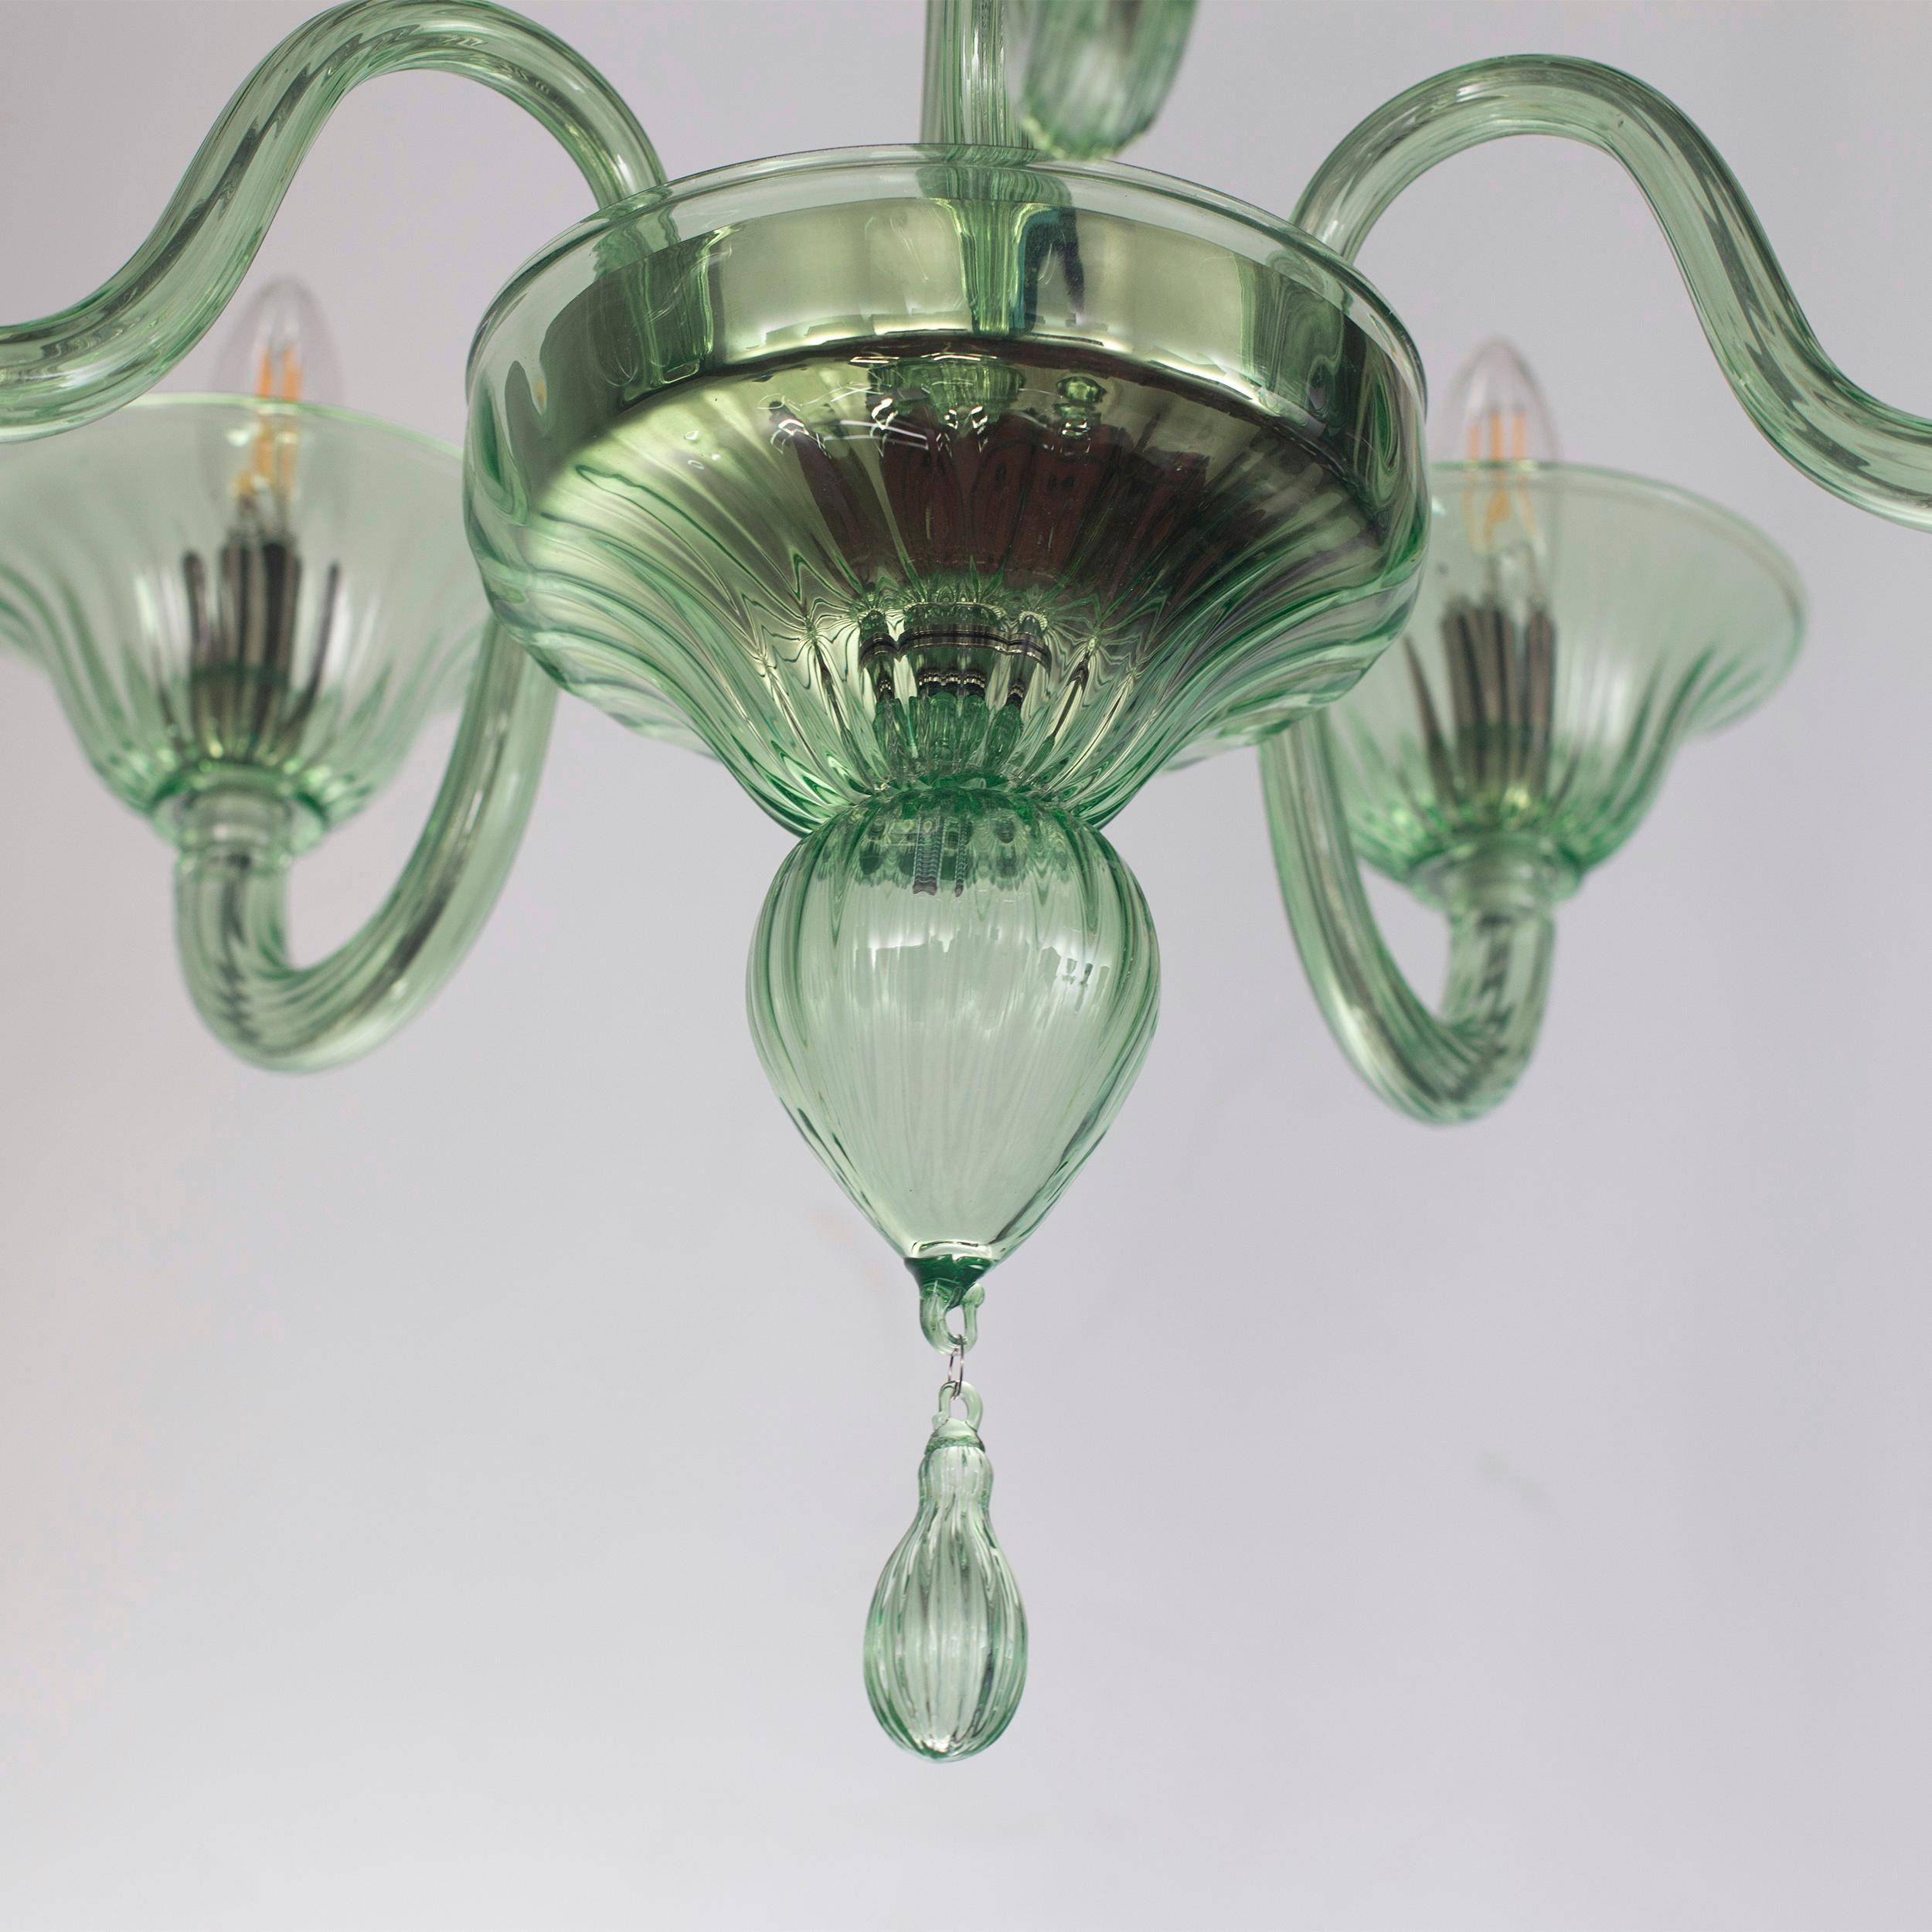 Italian Classic Chandelier, 5 Arms Green Murano Glass Simplicissimus by Multiforme For Sale